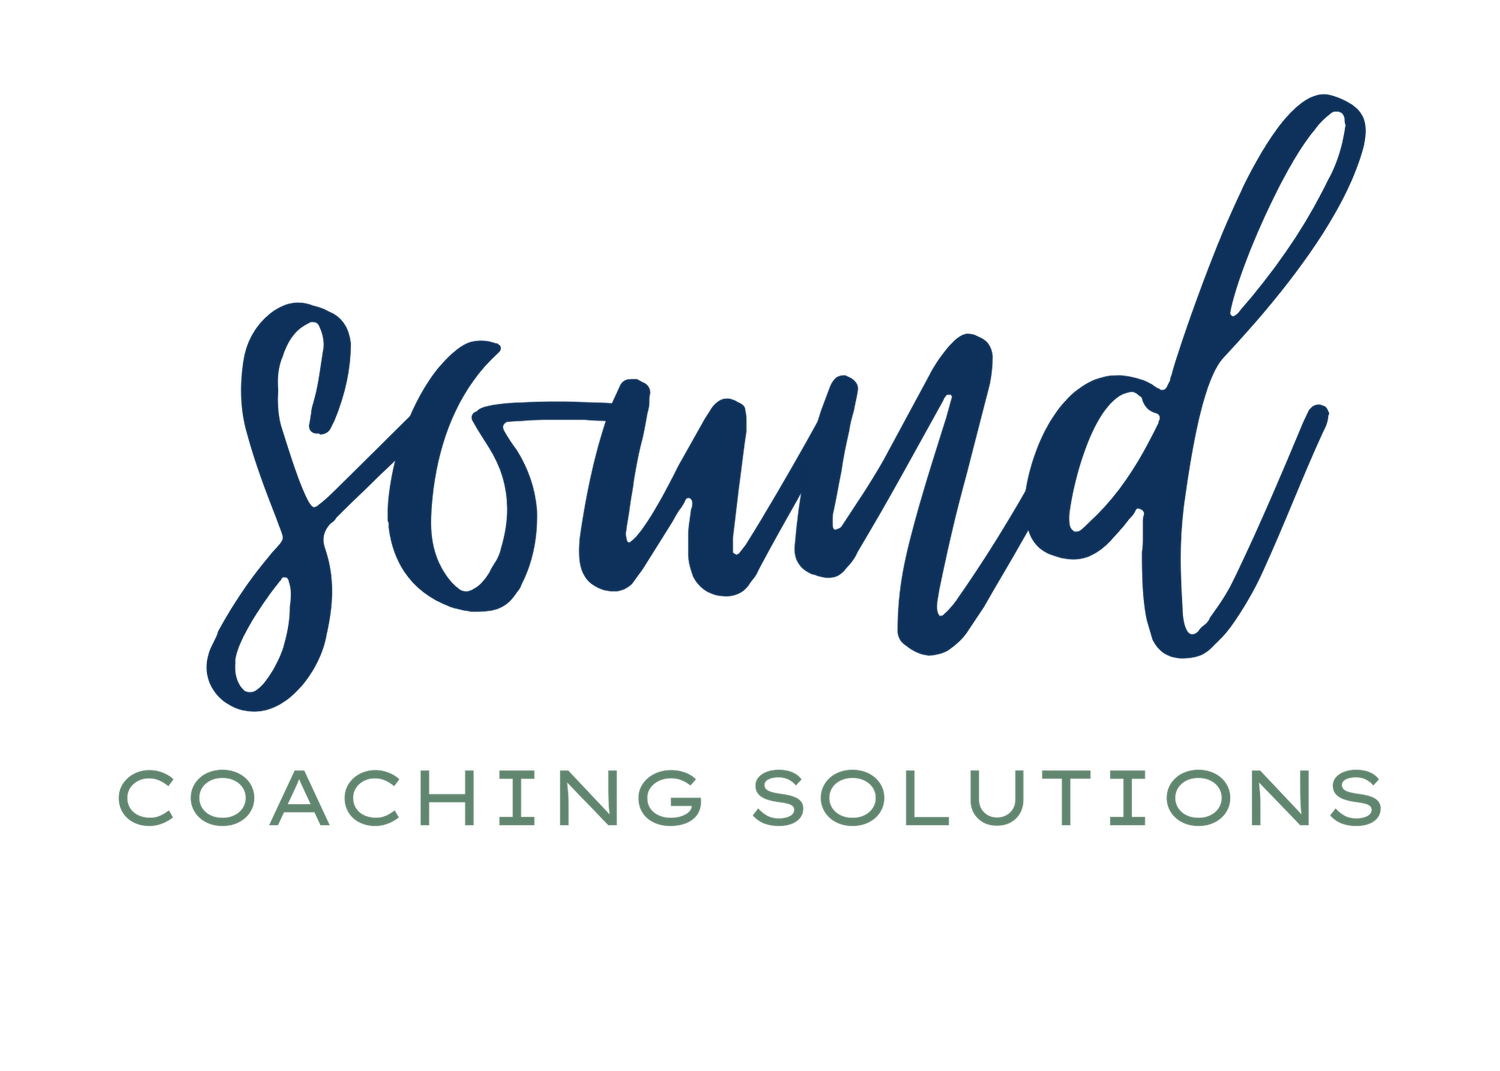 Sound Coaching Solutions